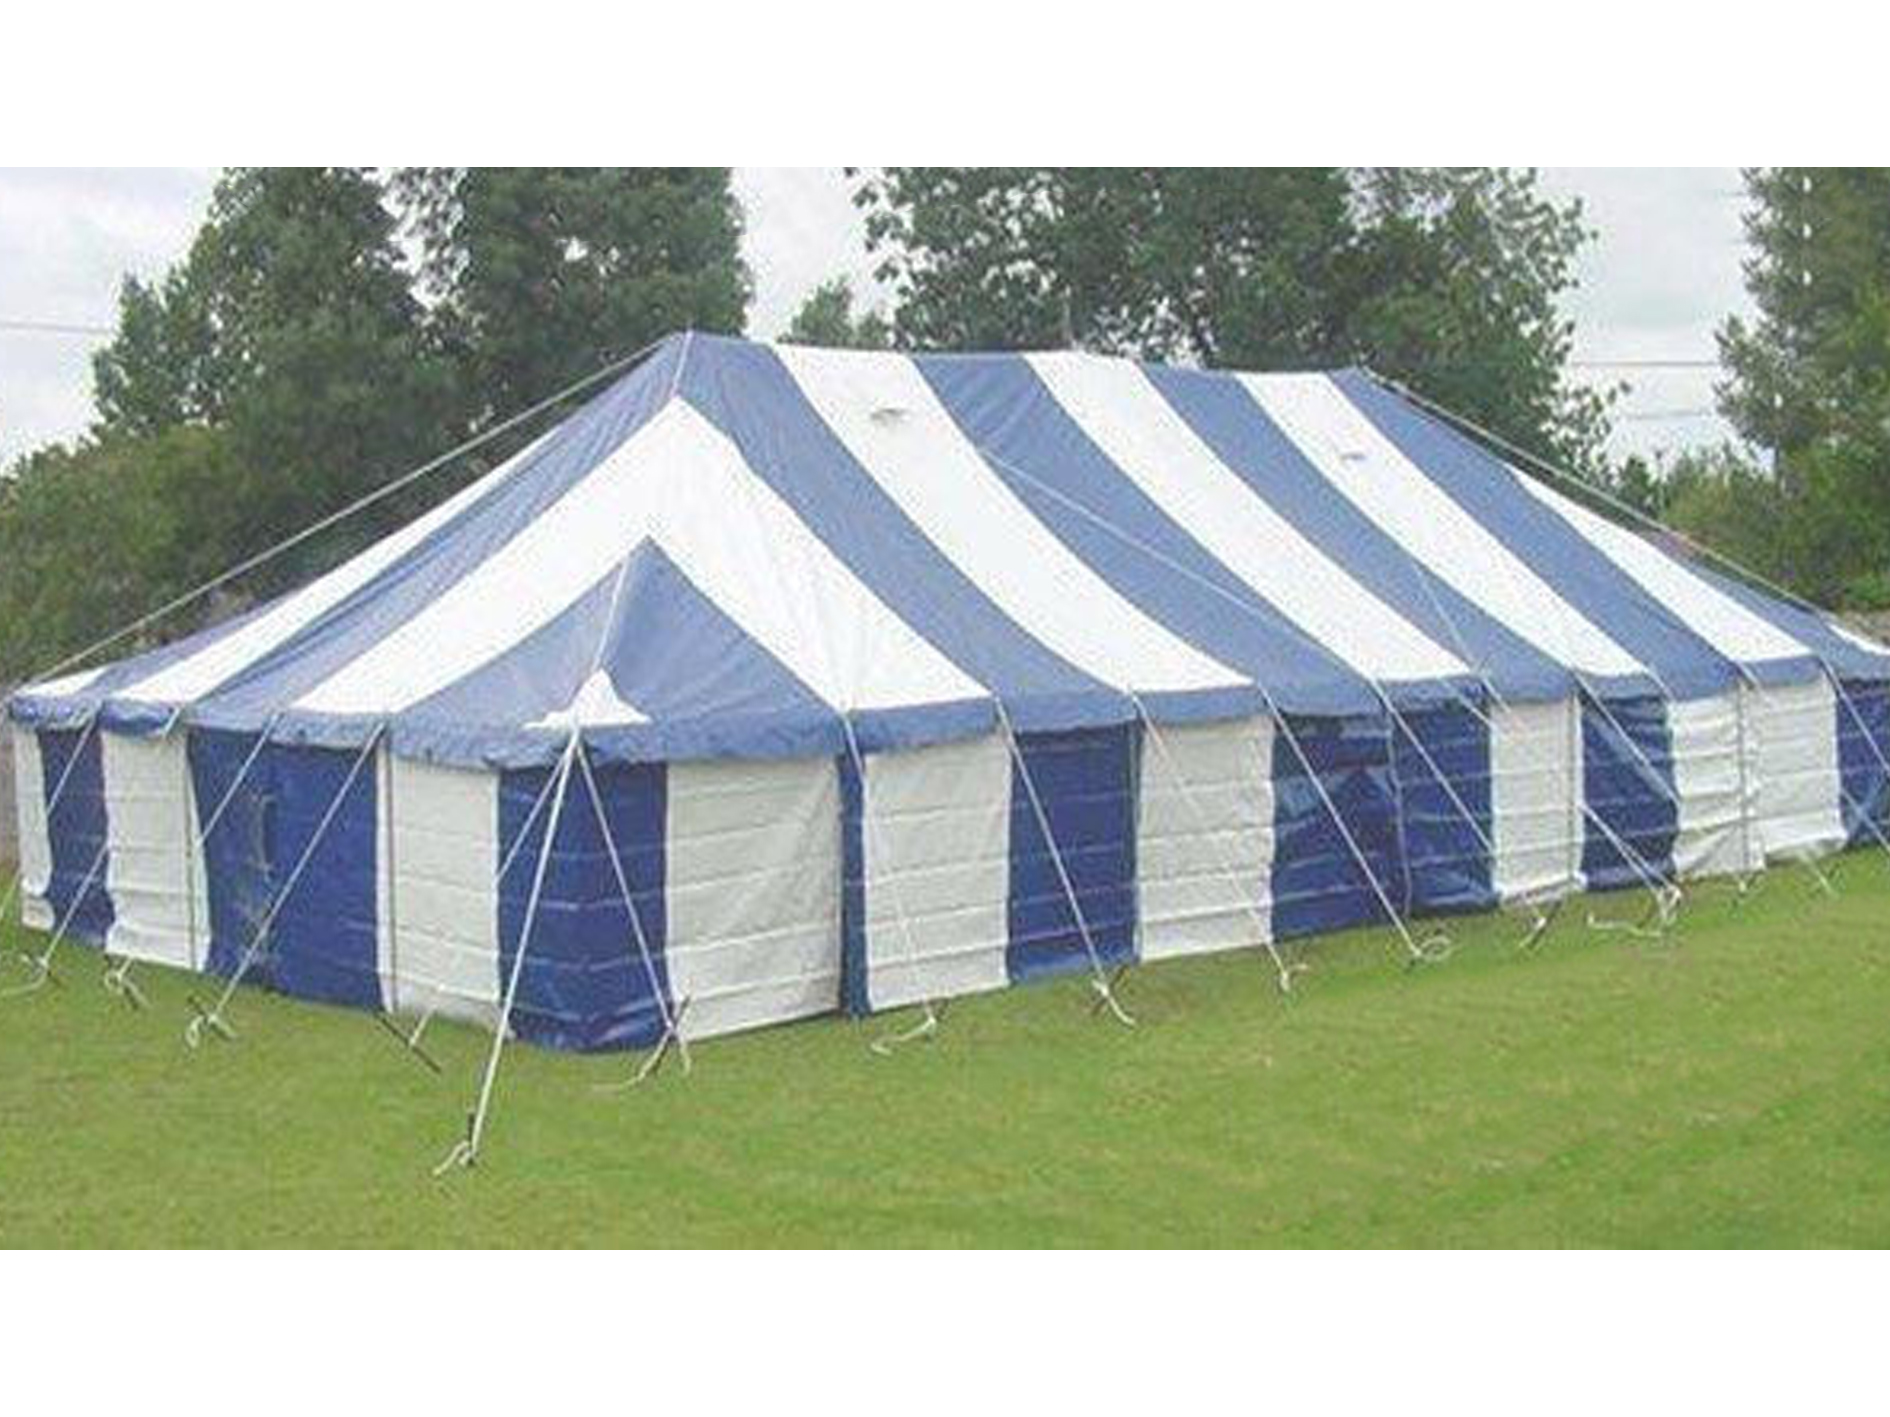 Products :: TENTS, GAZEBOS AND UMBRELLAS :: 9 x 18 PEG & POLE TENT